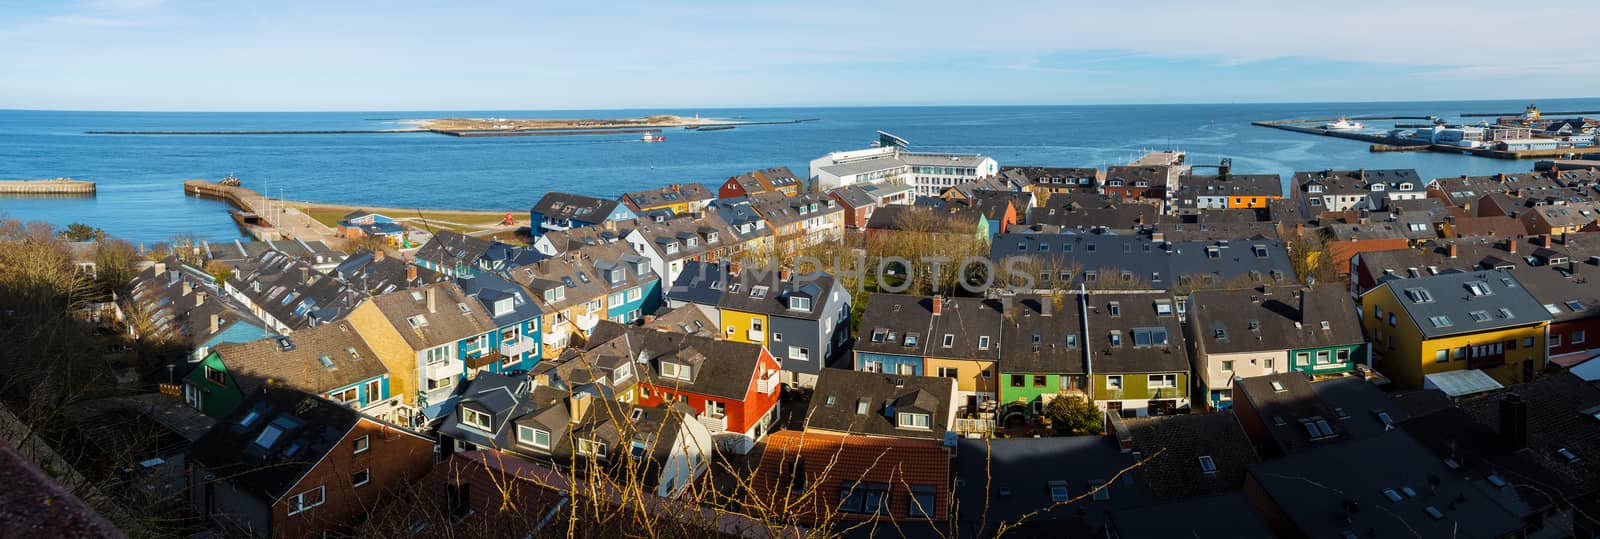 Panorama of residential area in Heligoland. Top view on roof of traditional colorful holiday homes. Island Helgoland, Germany